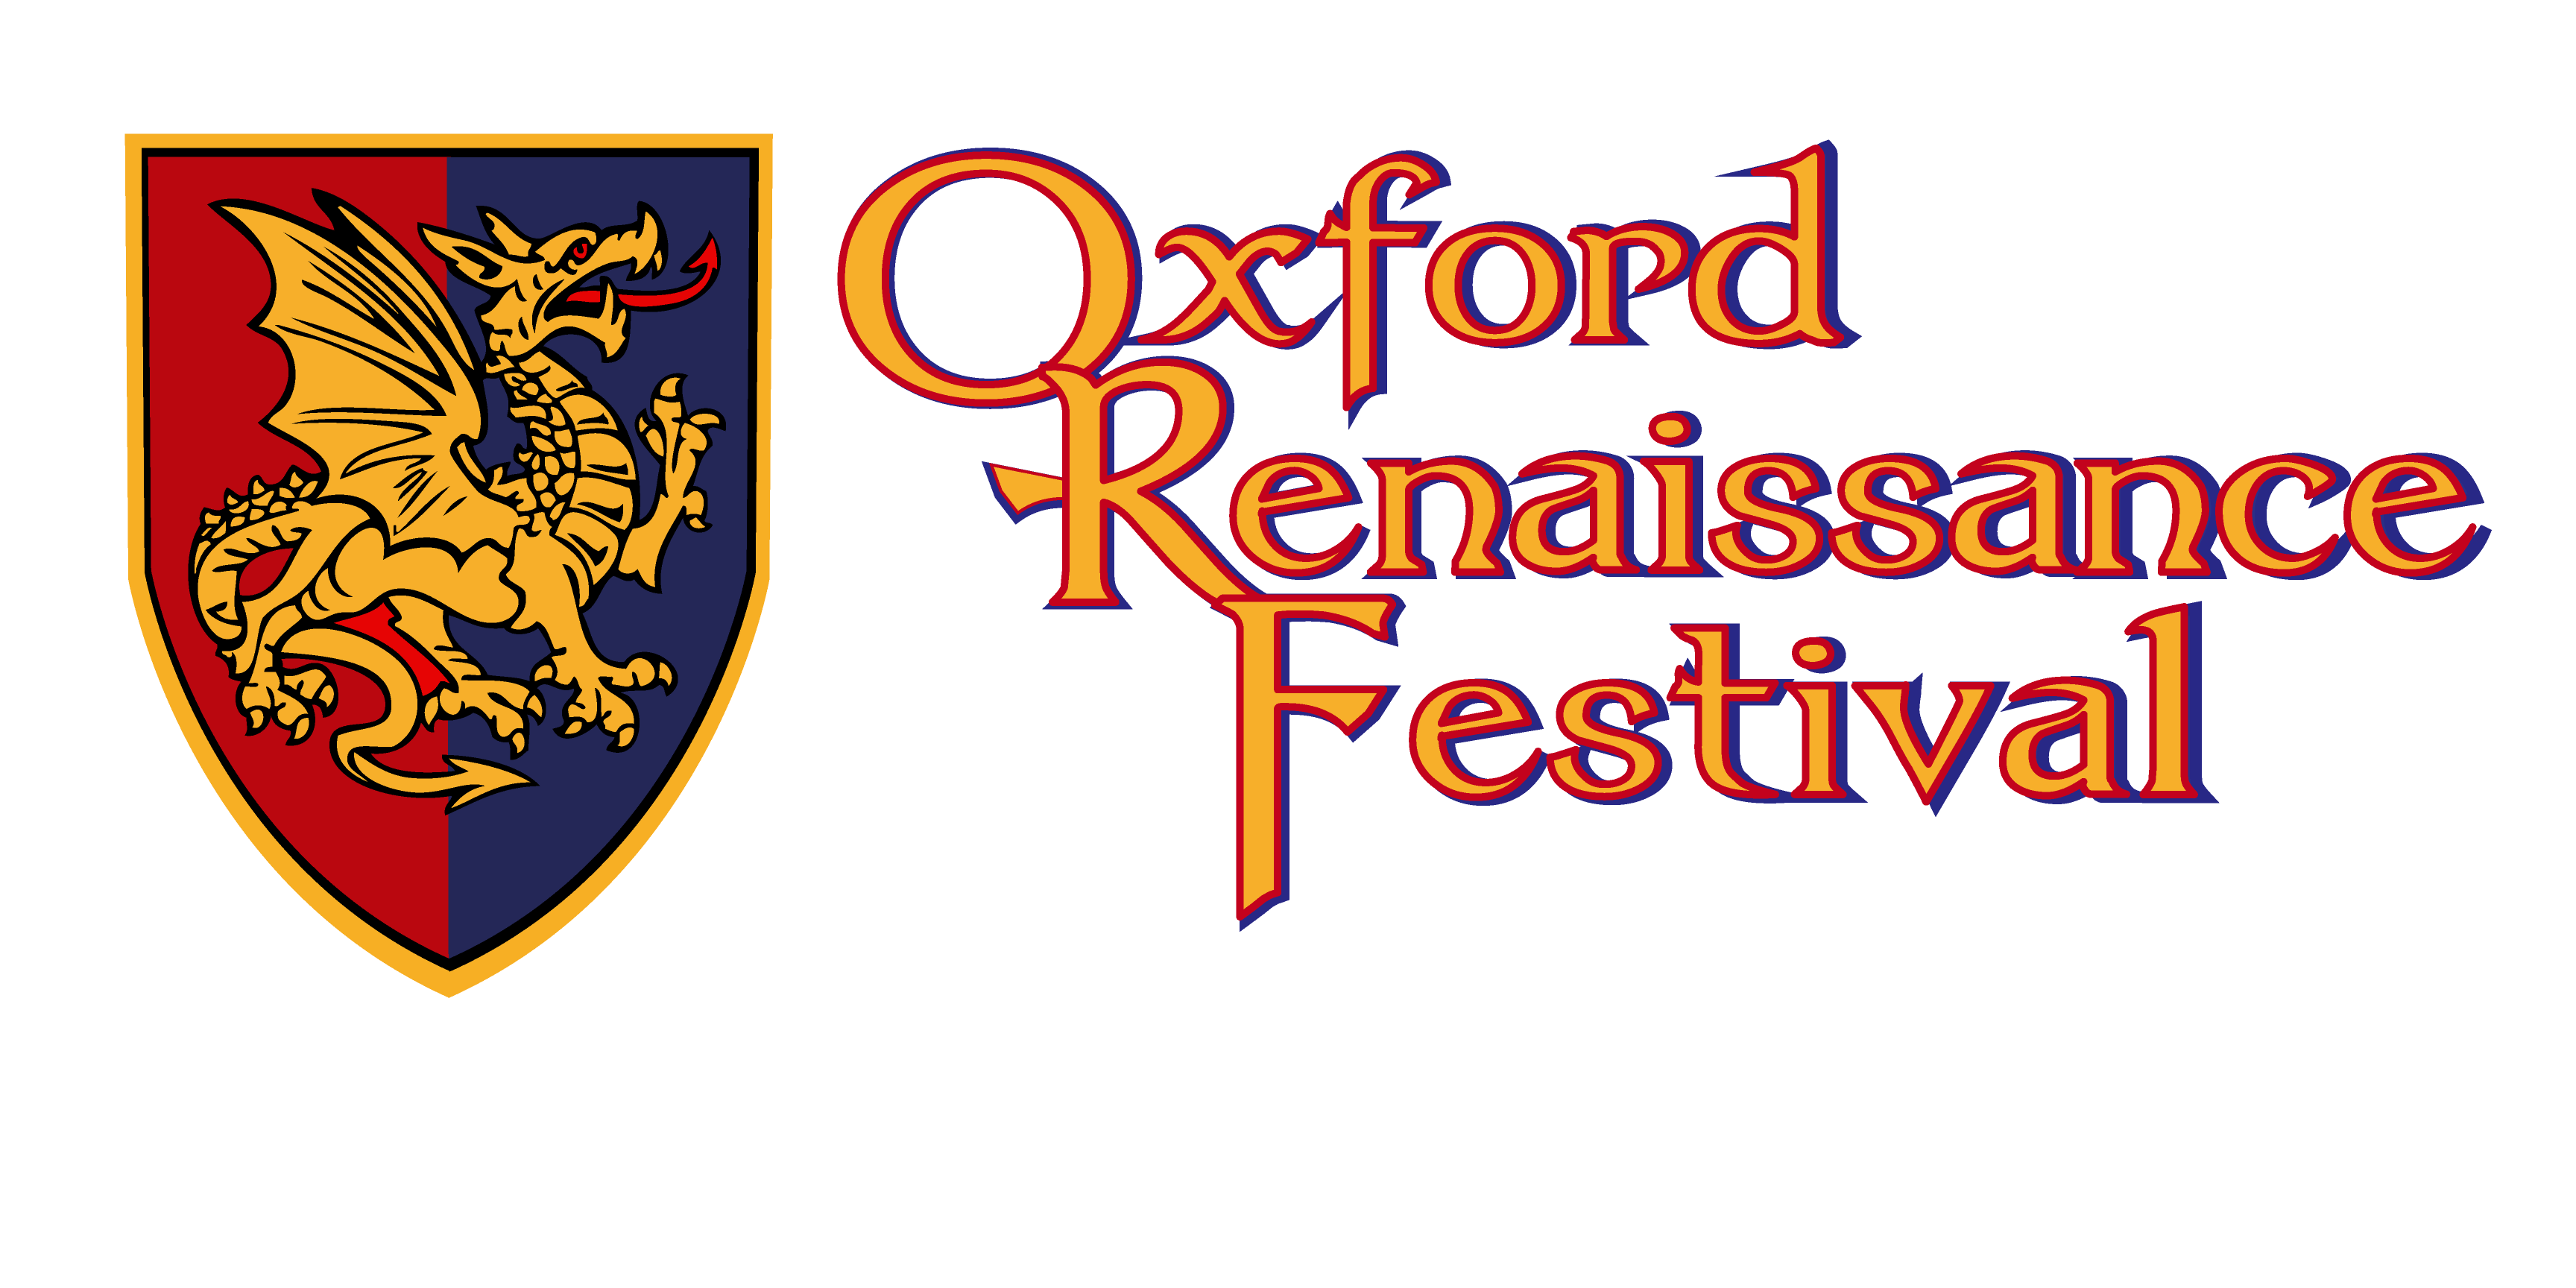 Read more about the article The Oxford Renaissance Festival Holding Auditions in London, Ontario, Canada